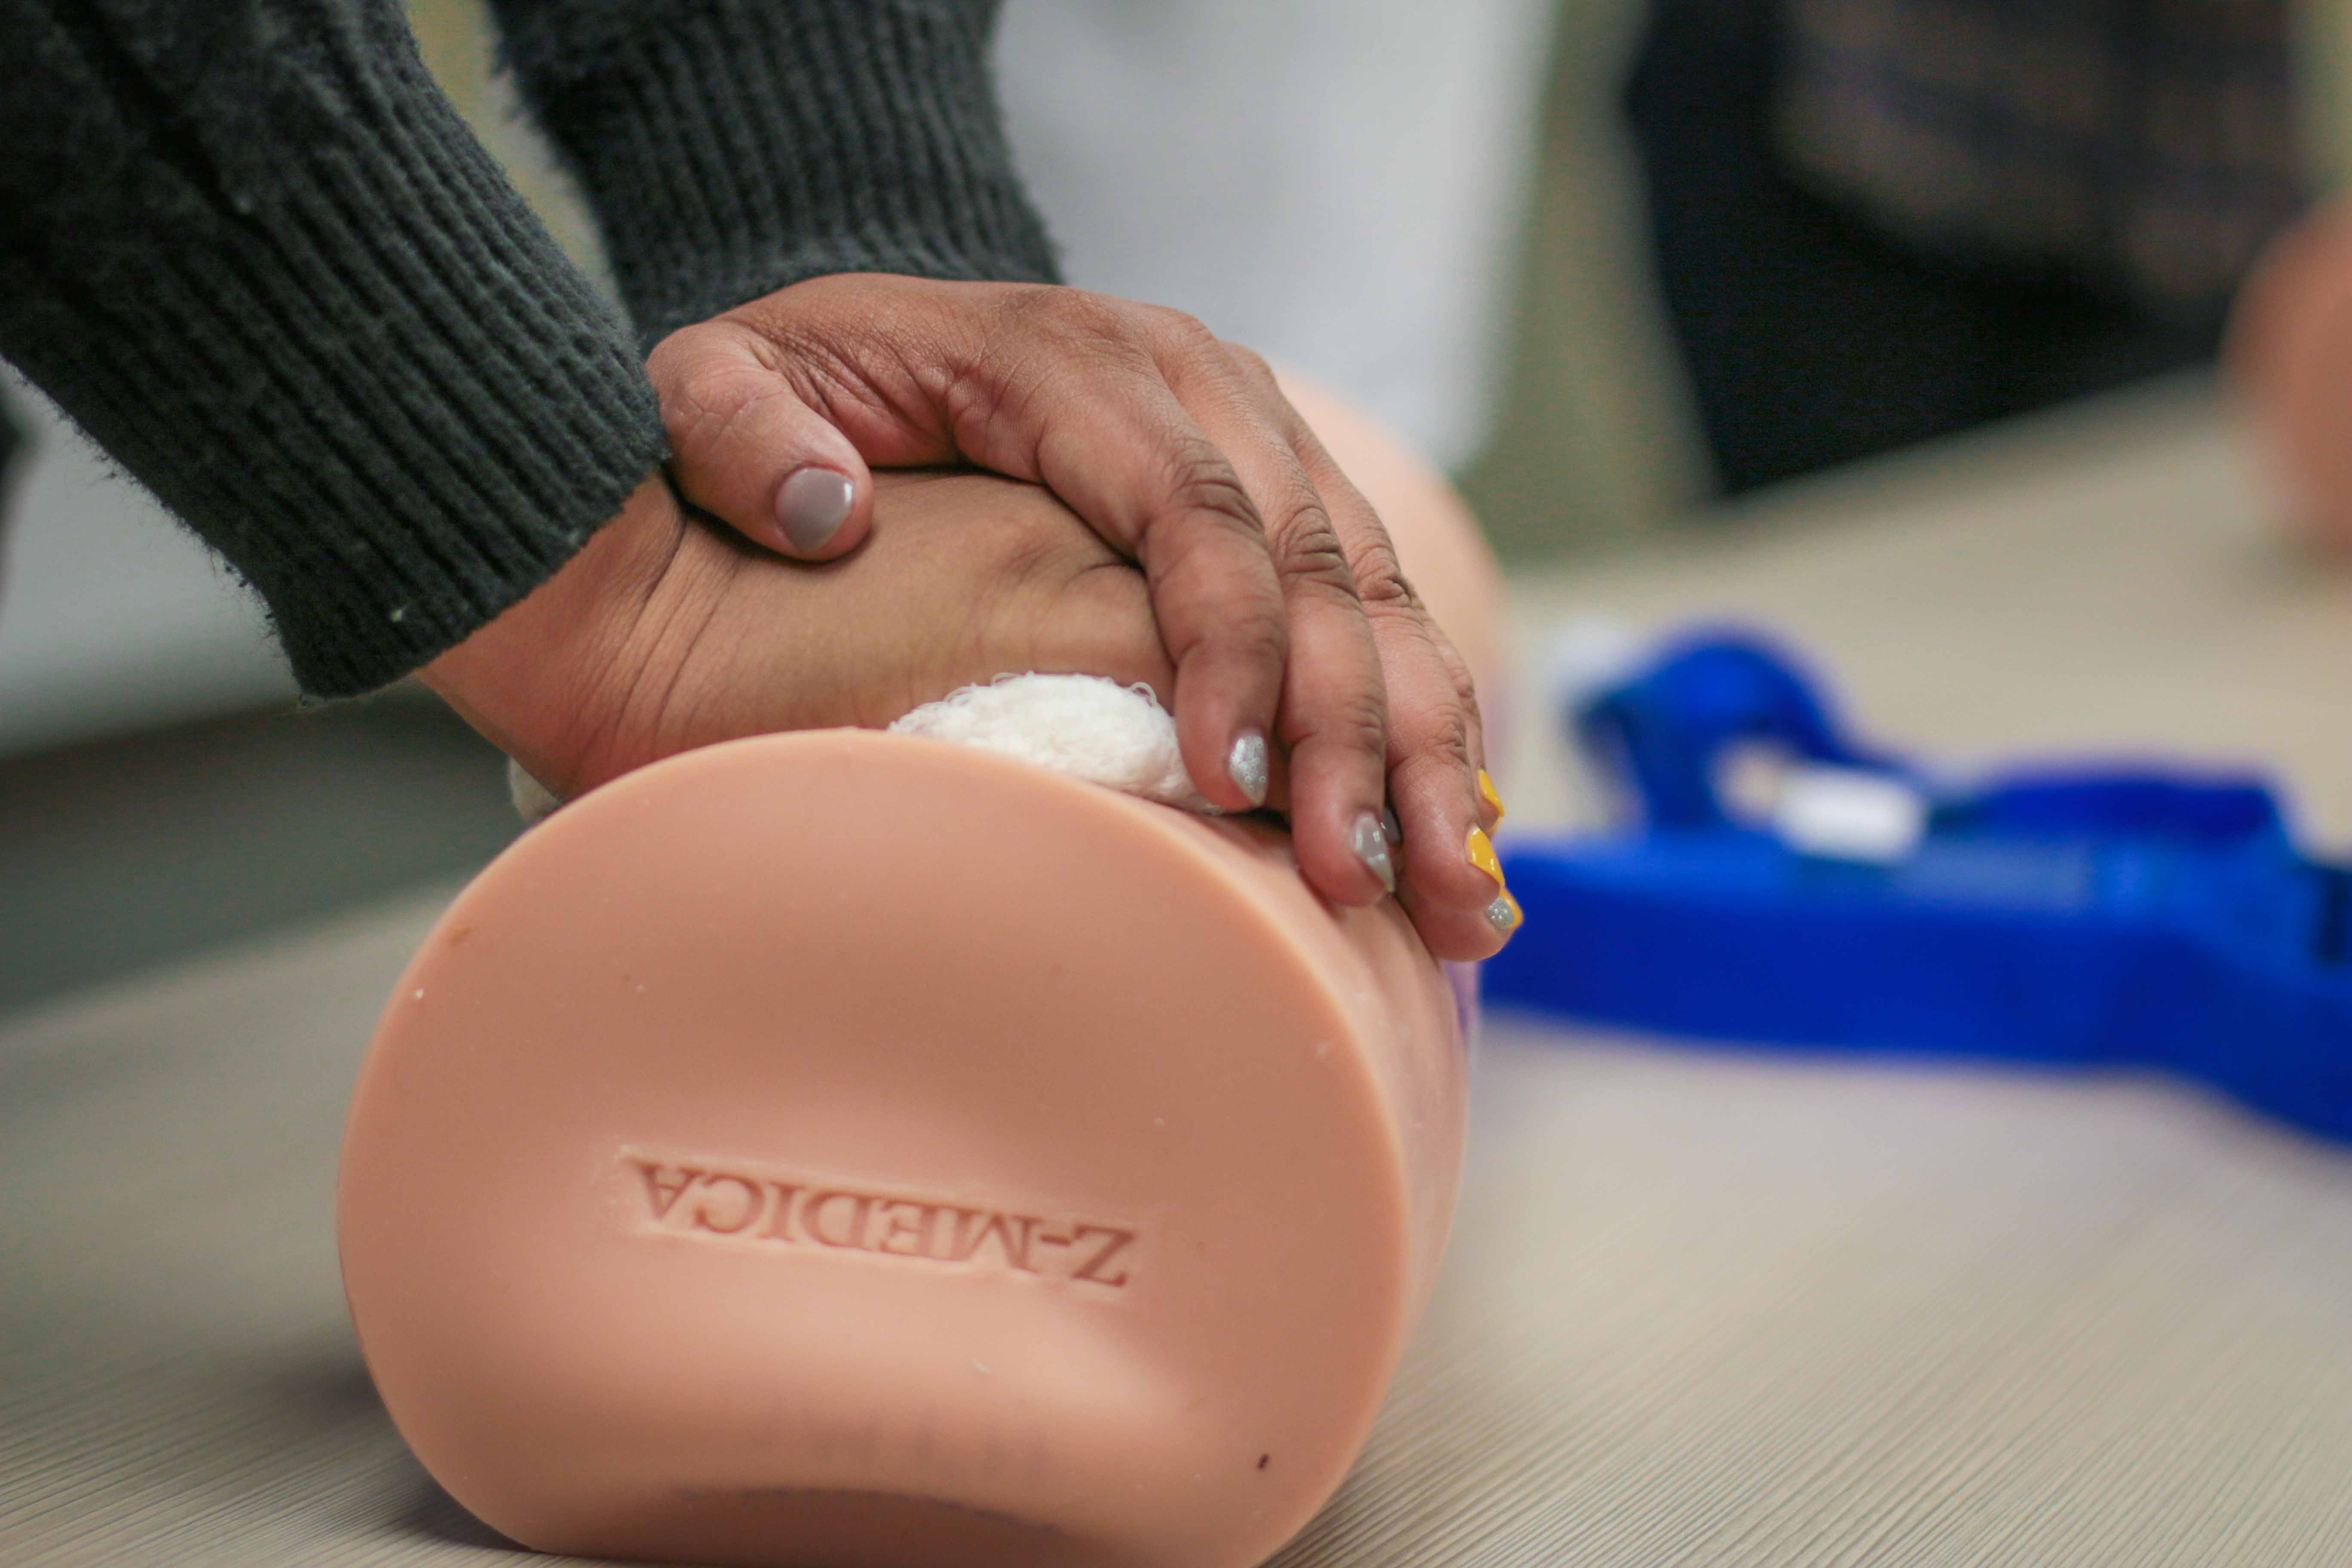 A woman practices life-saving techniques during a Stop the Bleed class